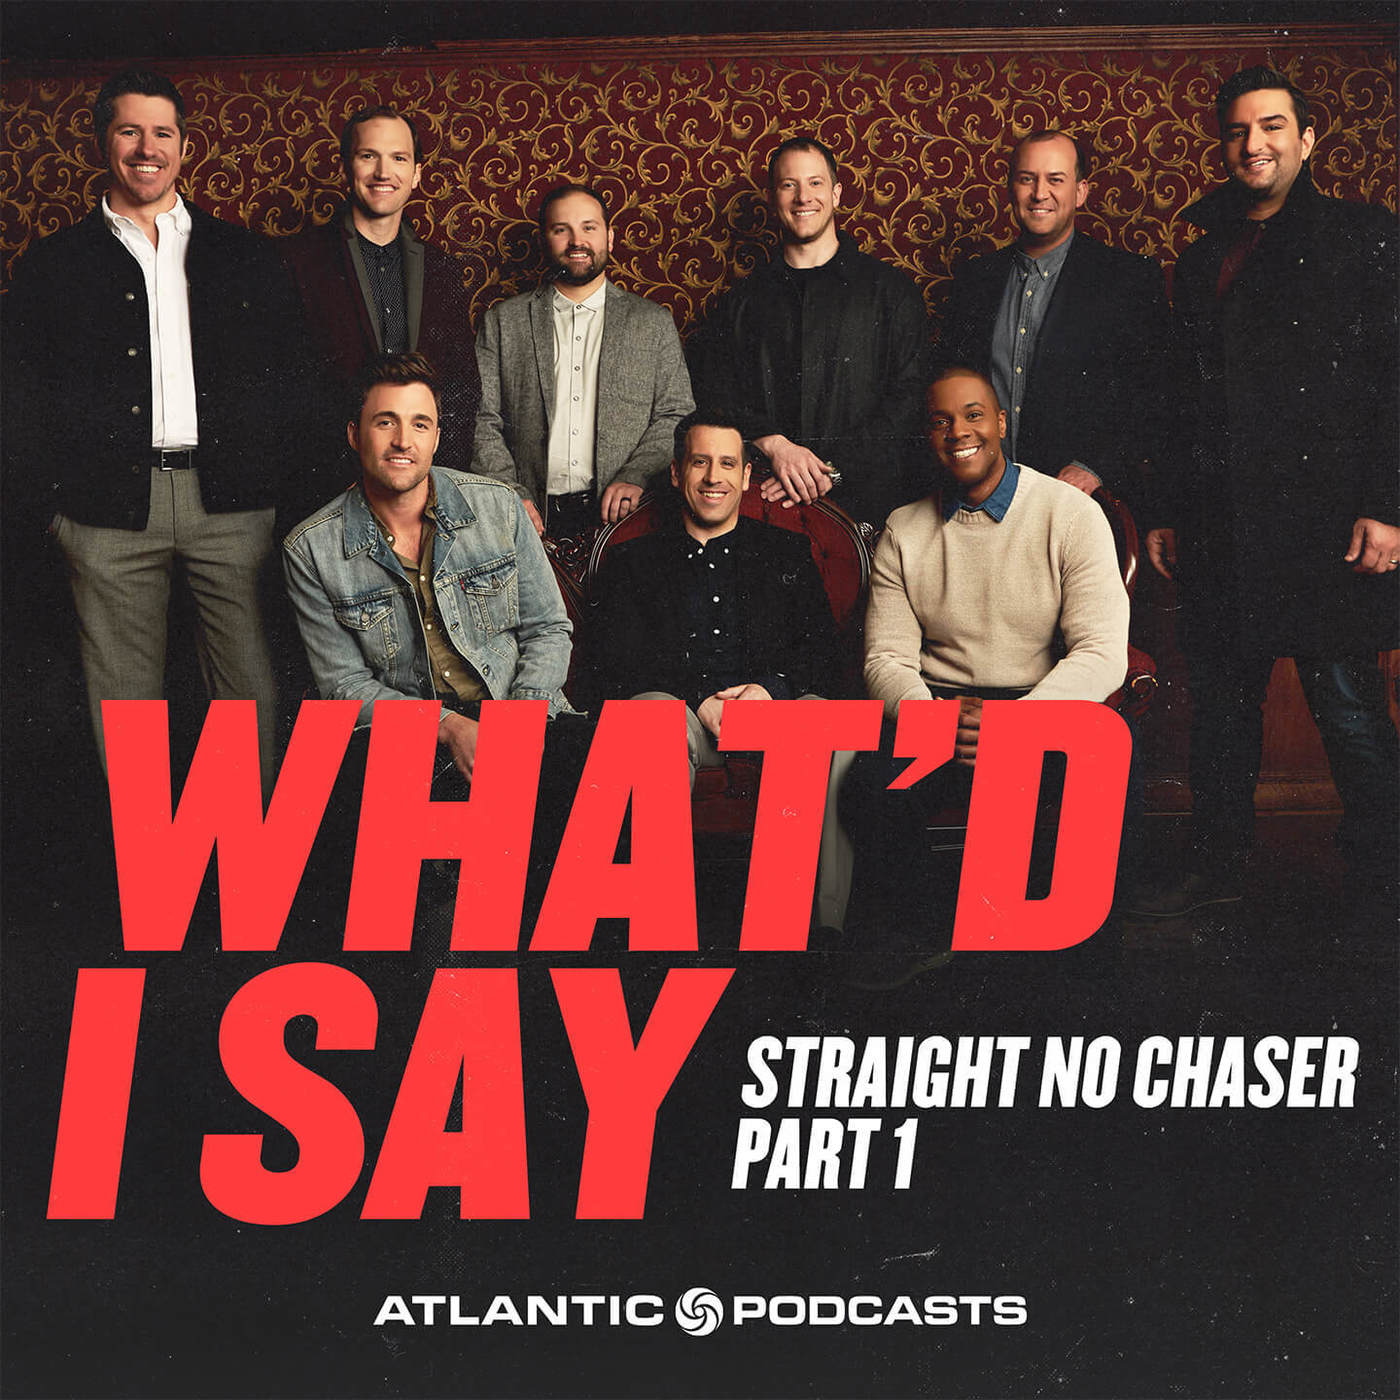 Straight No Chaser (Part 1)